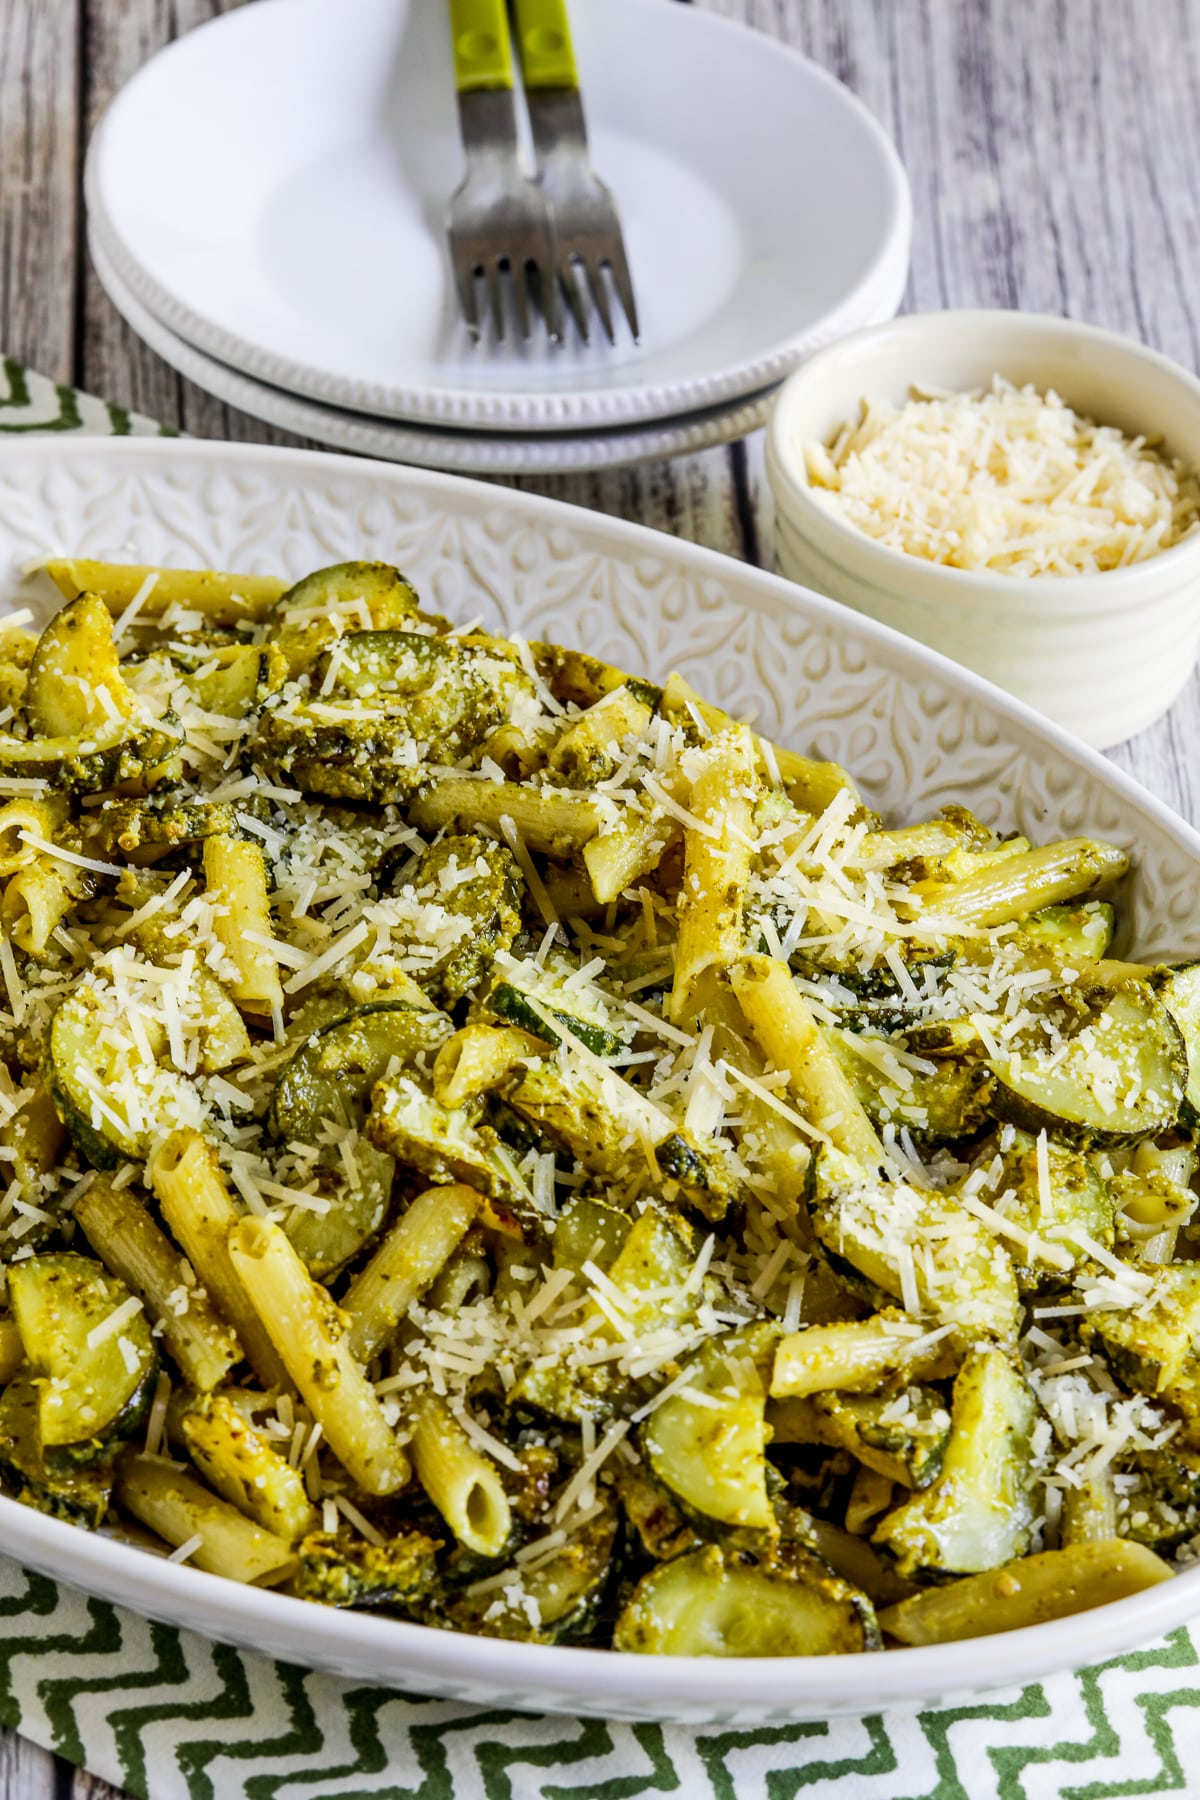 Penne pasta with zucchini and pesto on a serving plate with parmesan cheese